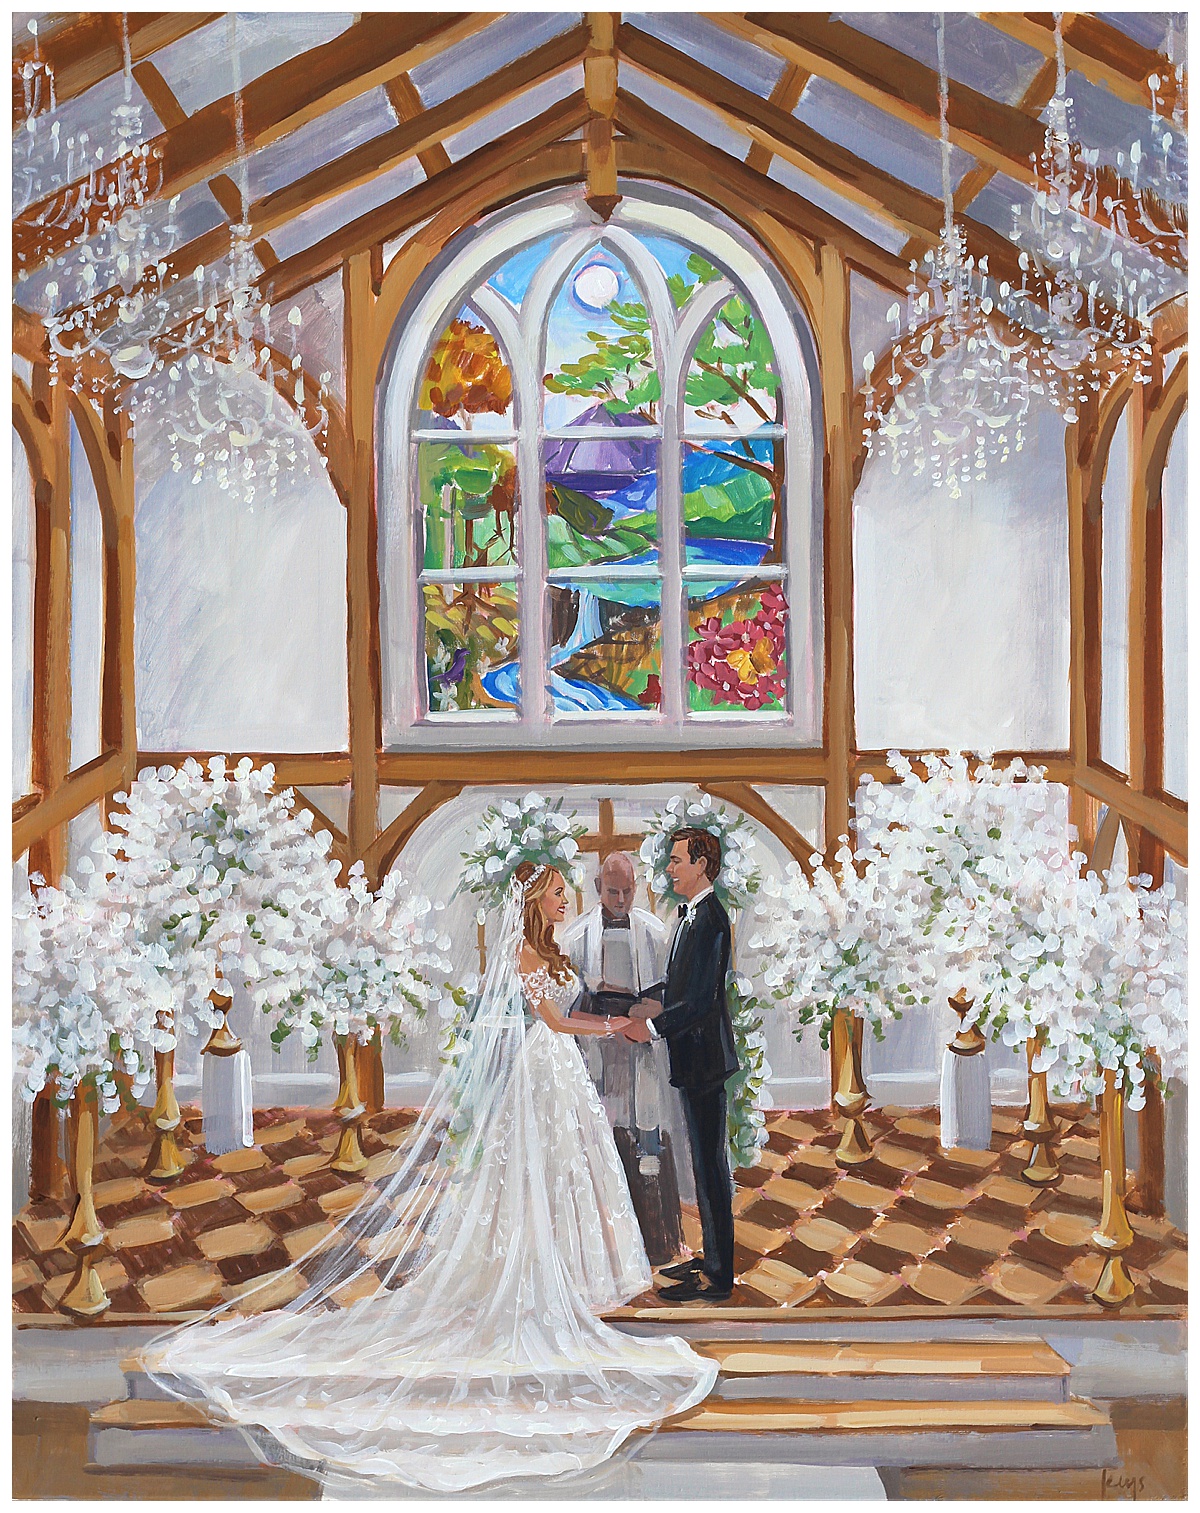 Alexis and Zach's Greenbrier Chapel Wedding Painting